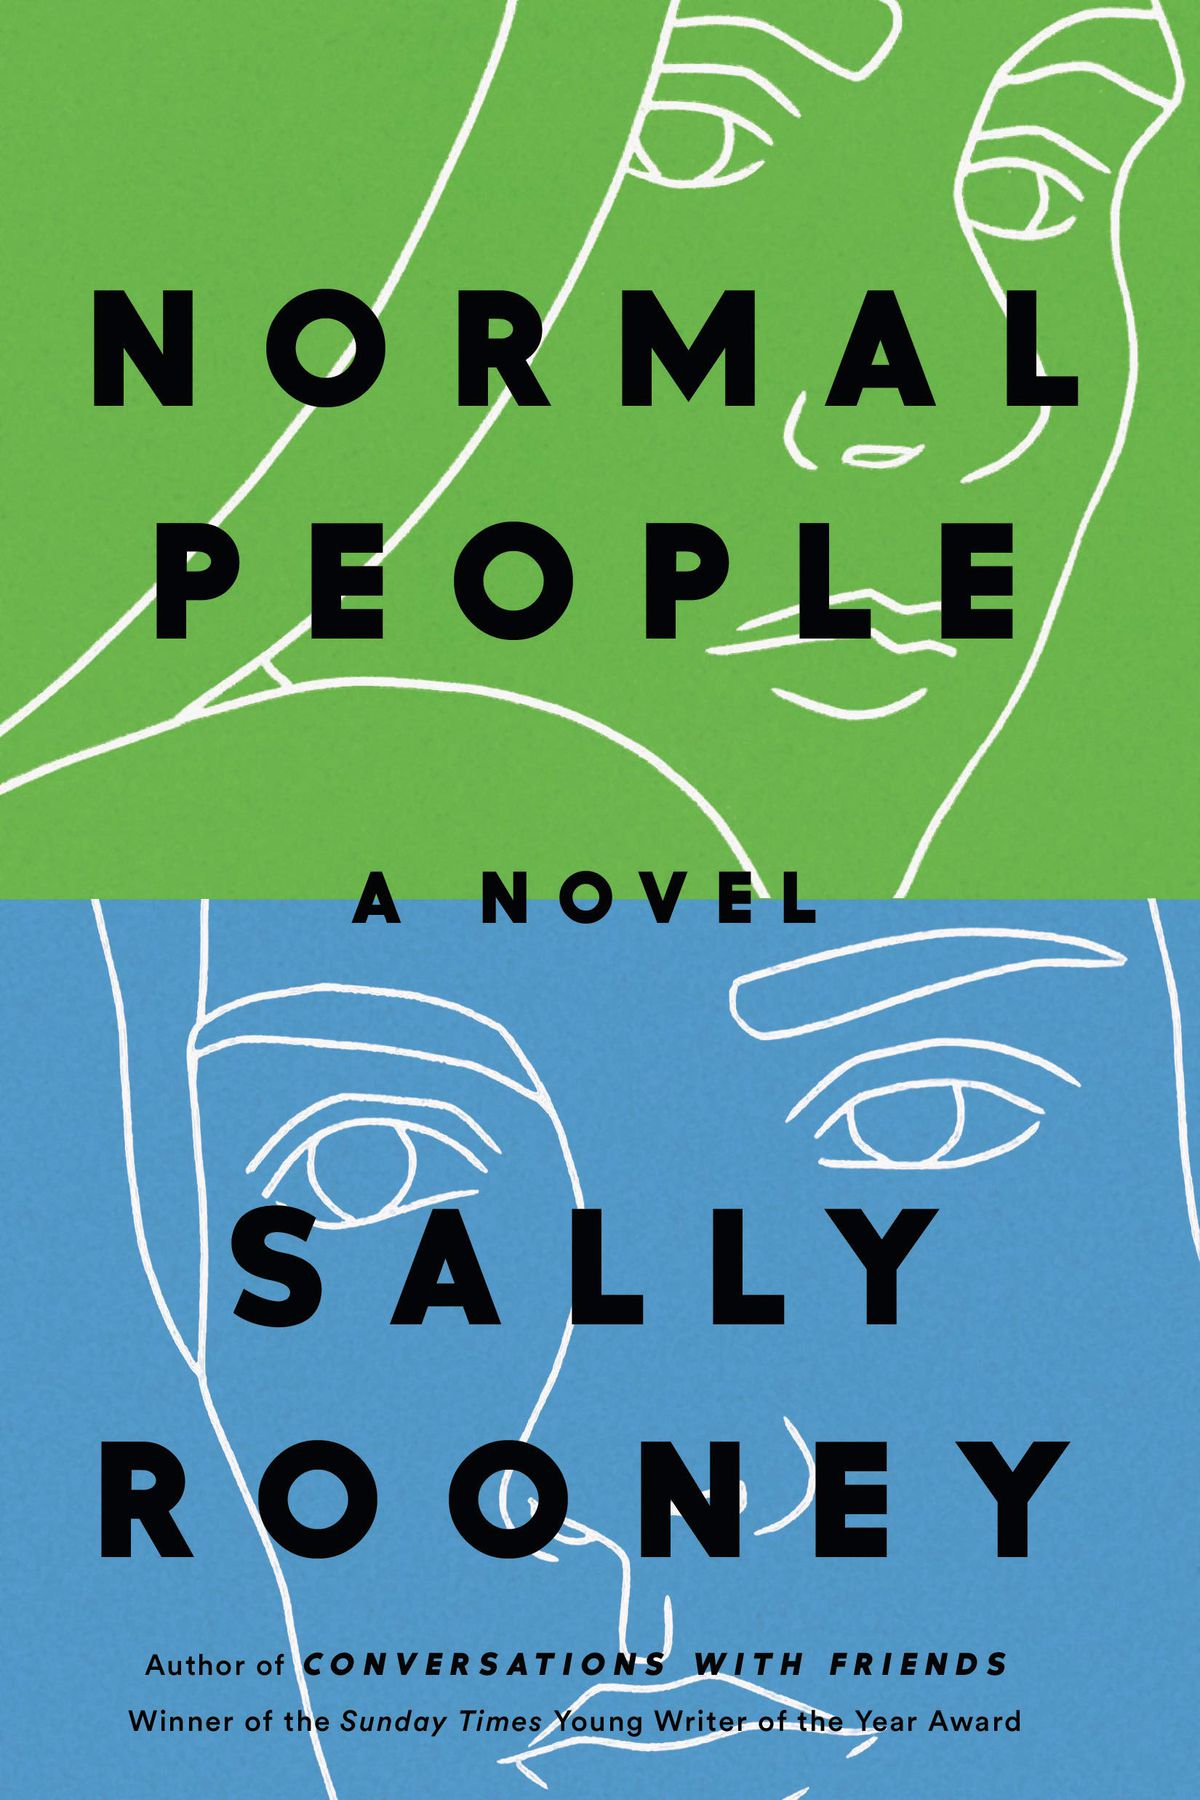 US cover of “Normal People” by Sally Rooney